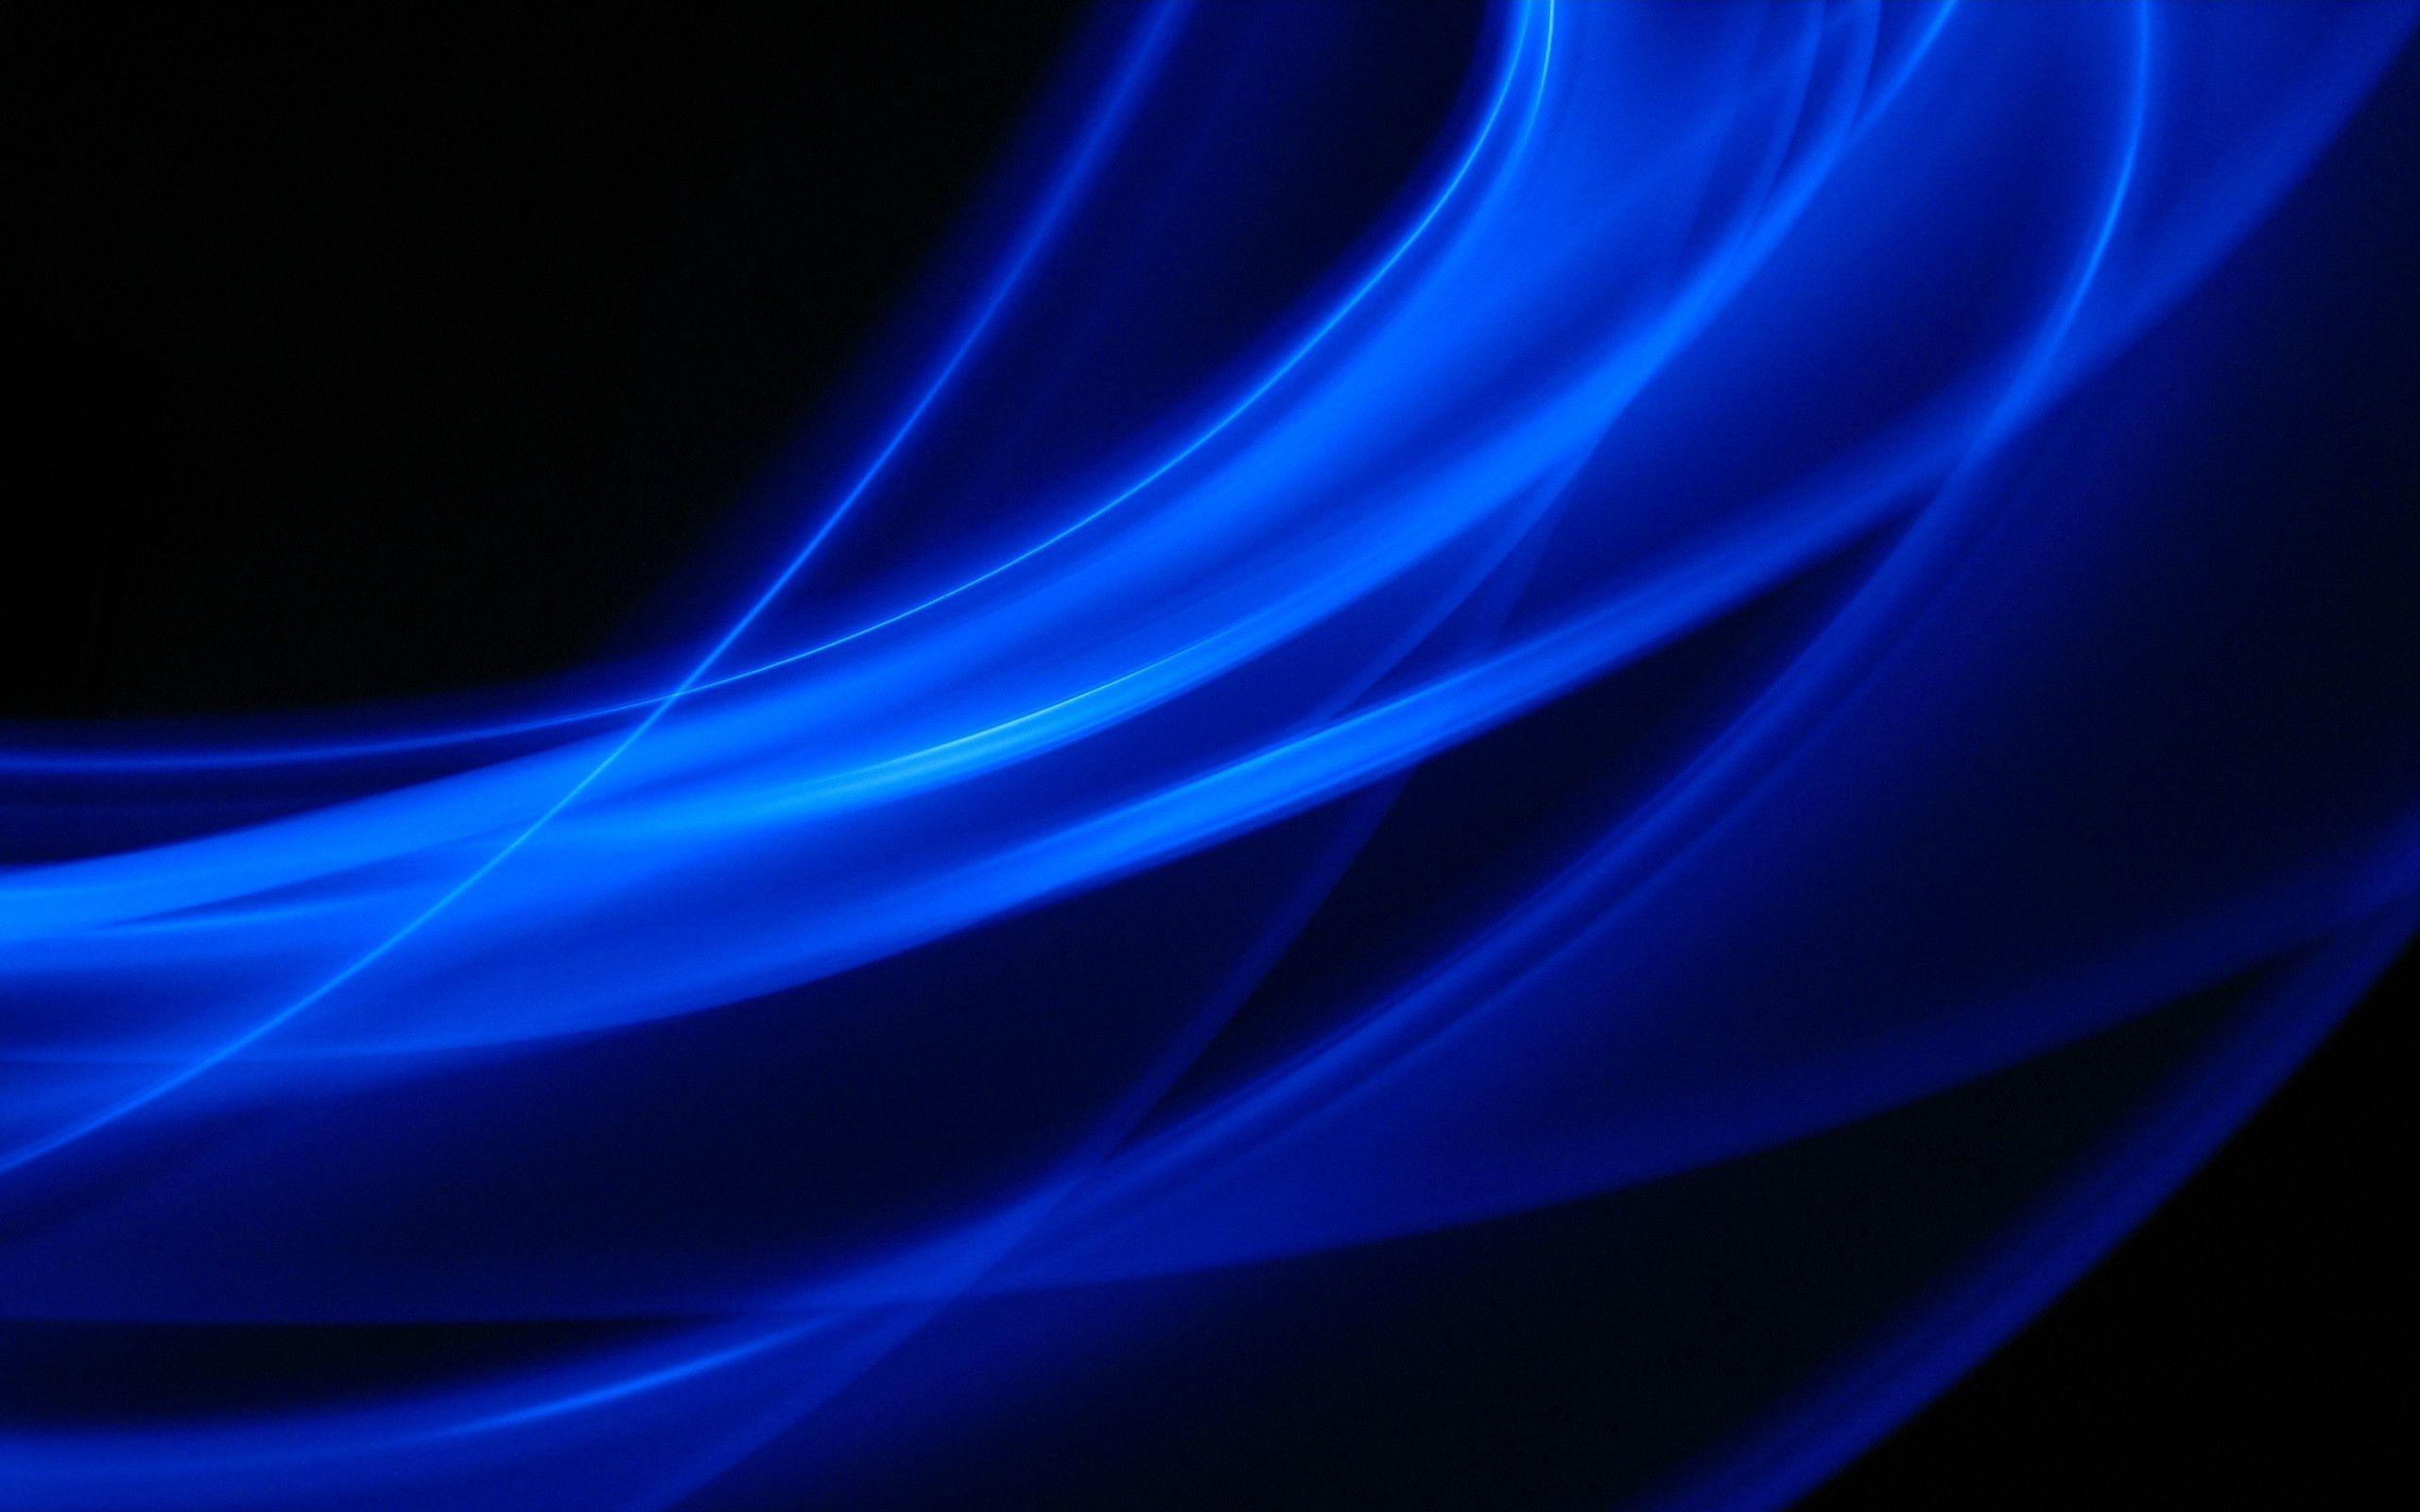 Abstract Blue HD Wallpapers - Wallpaper Cave